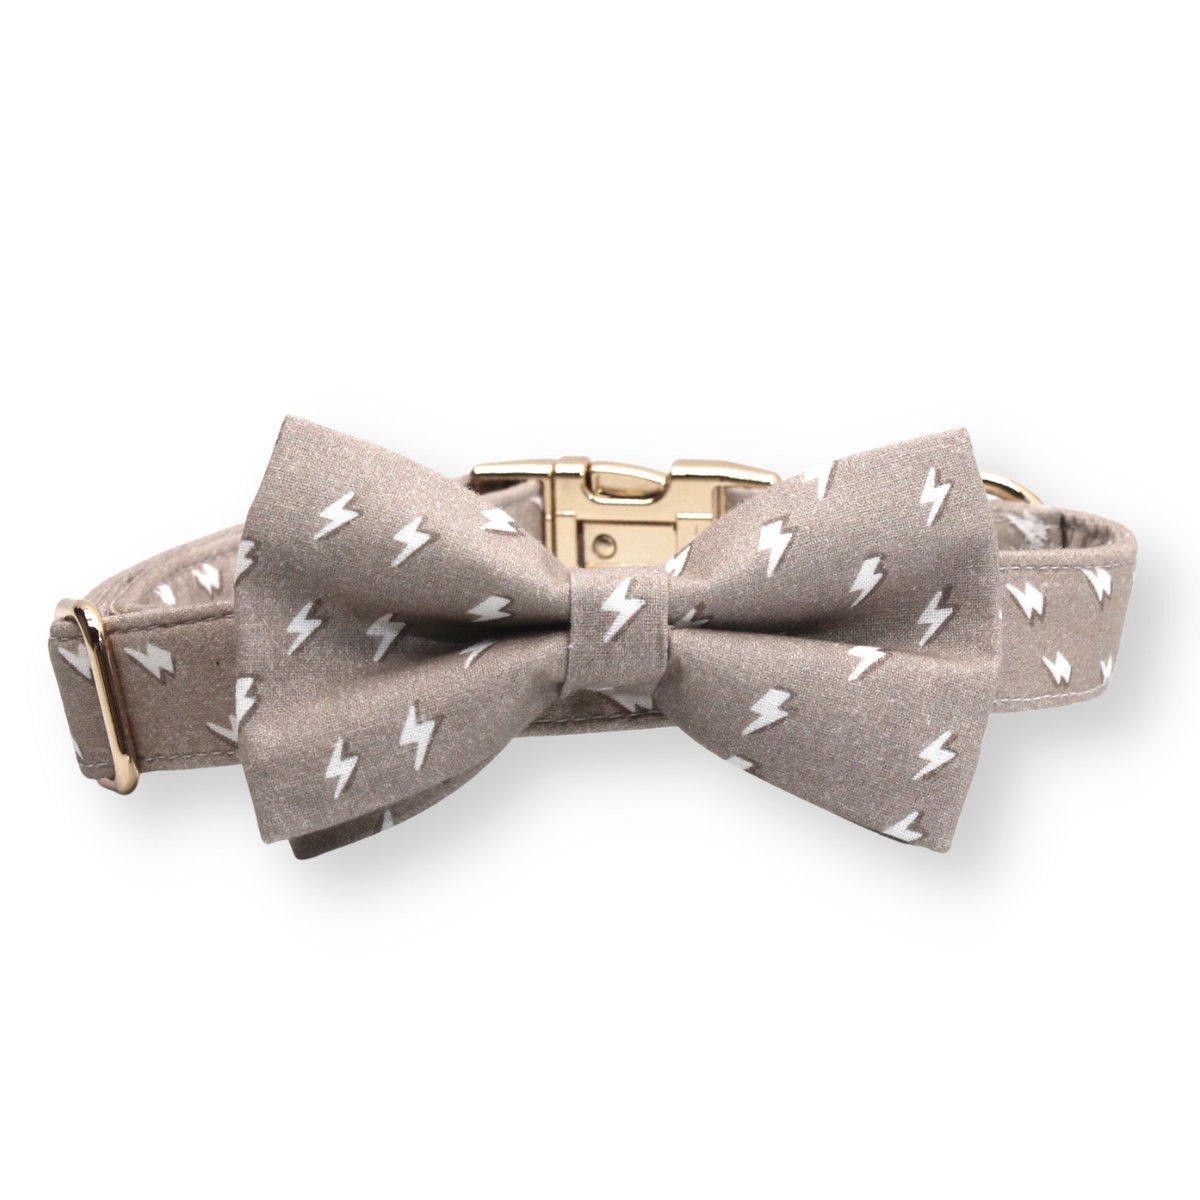 Cute dog bow tie collars girl - Dog collar with name - Dog bow tie collars Canada